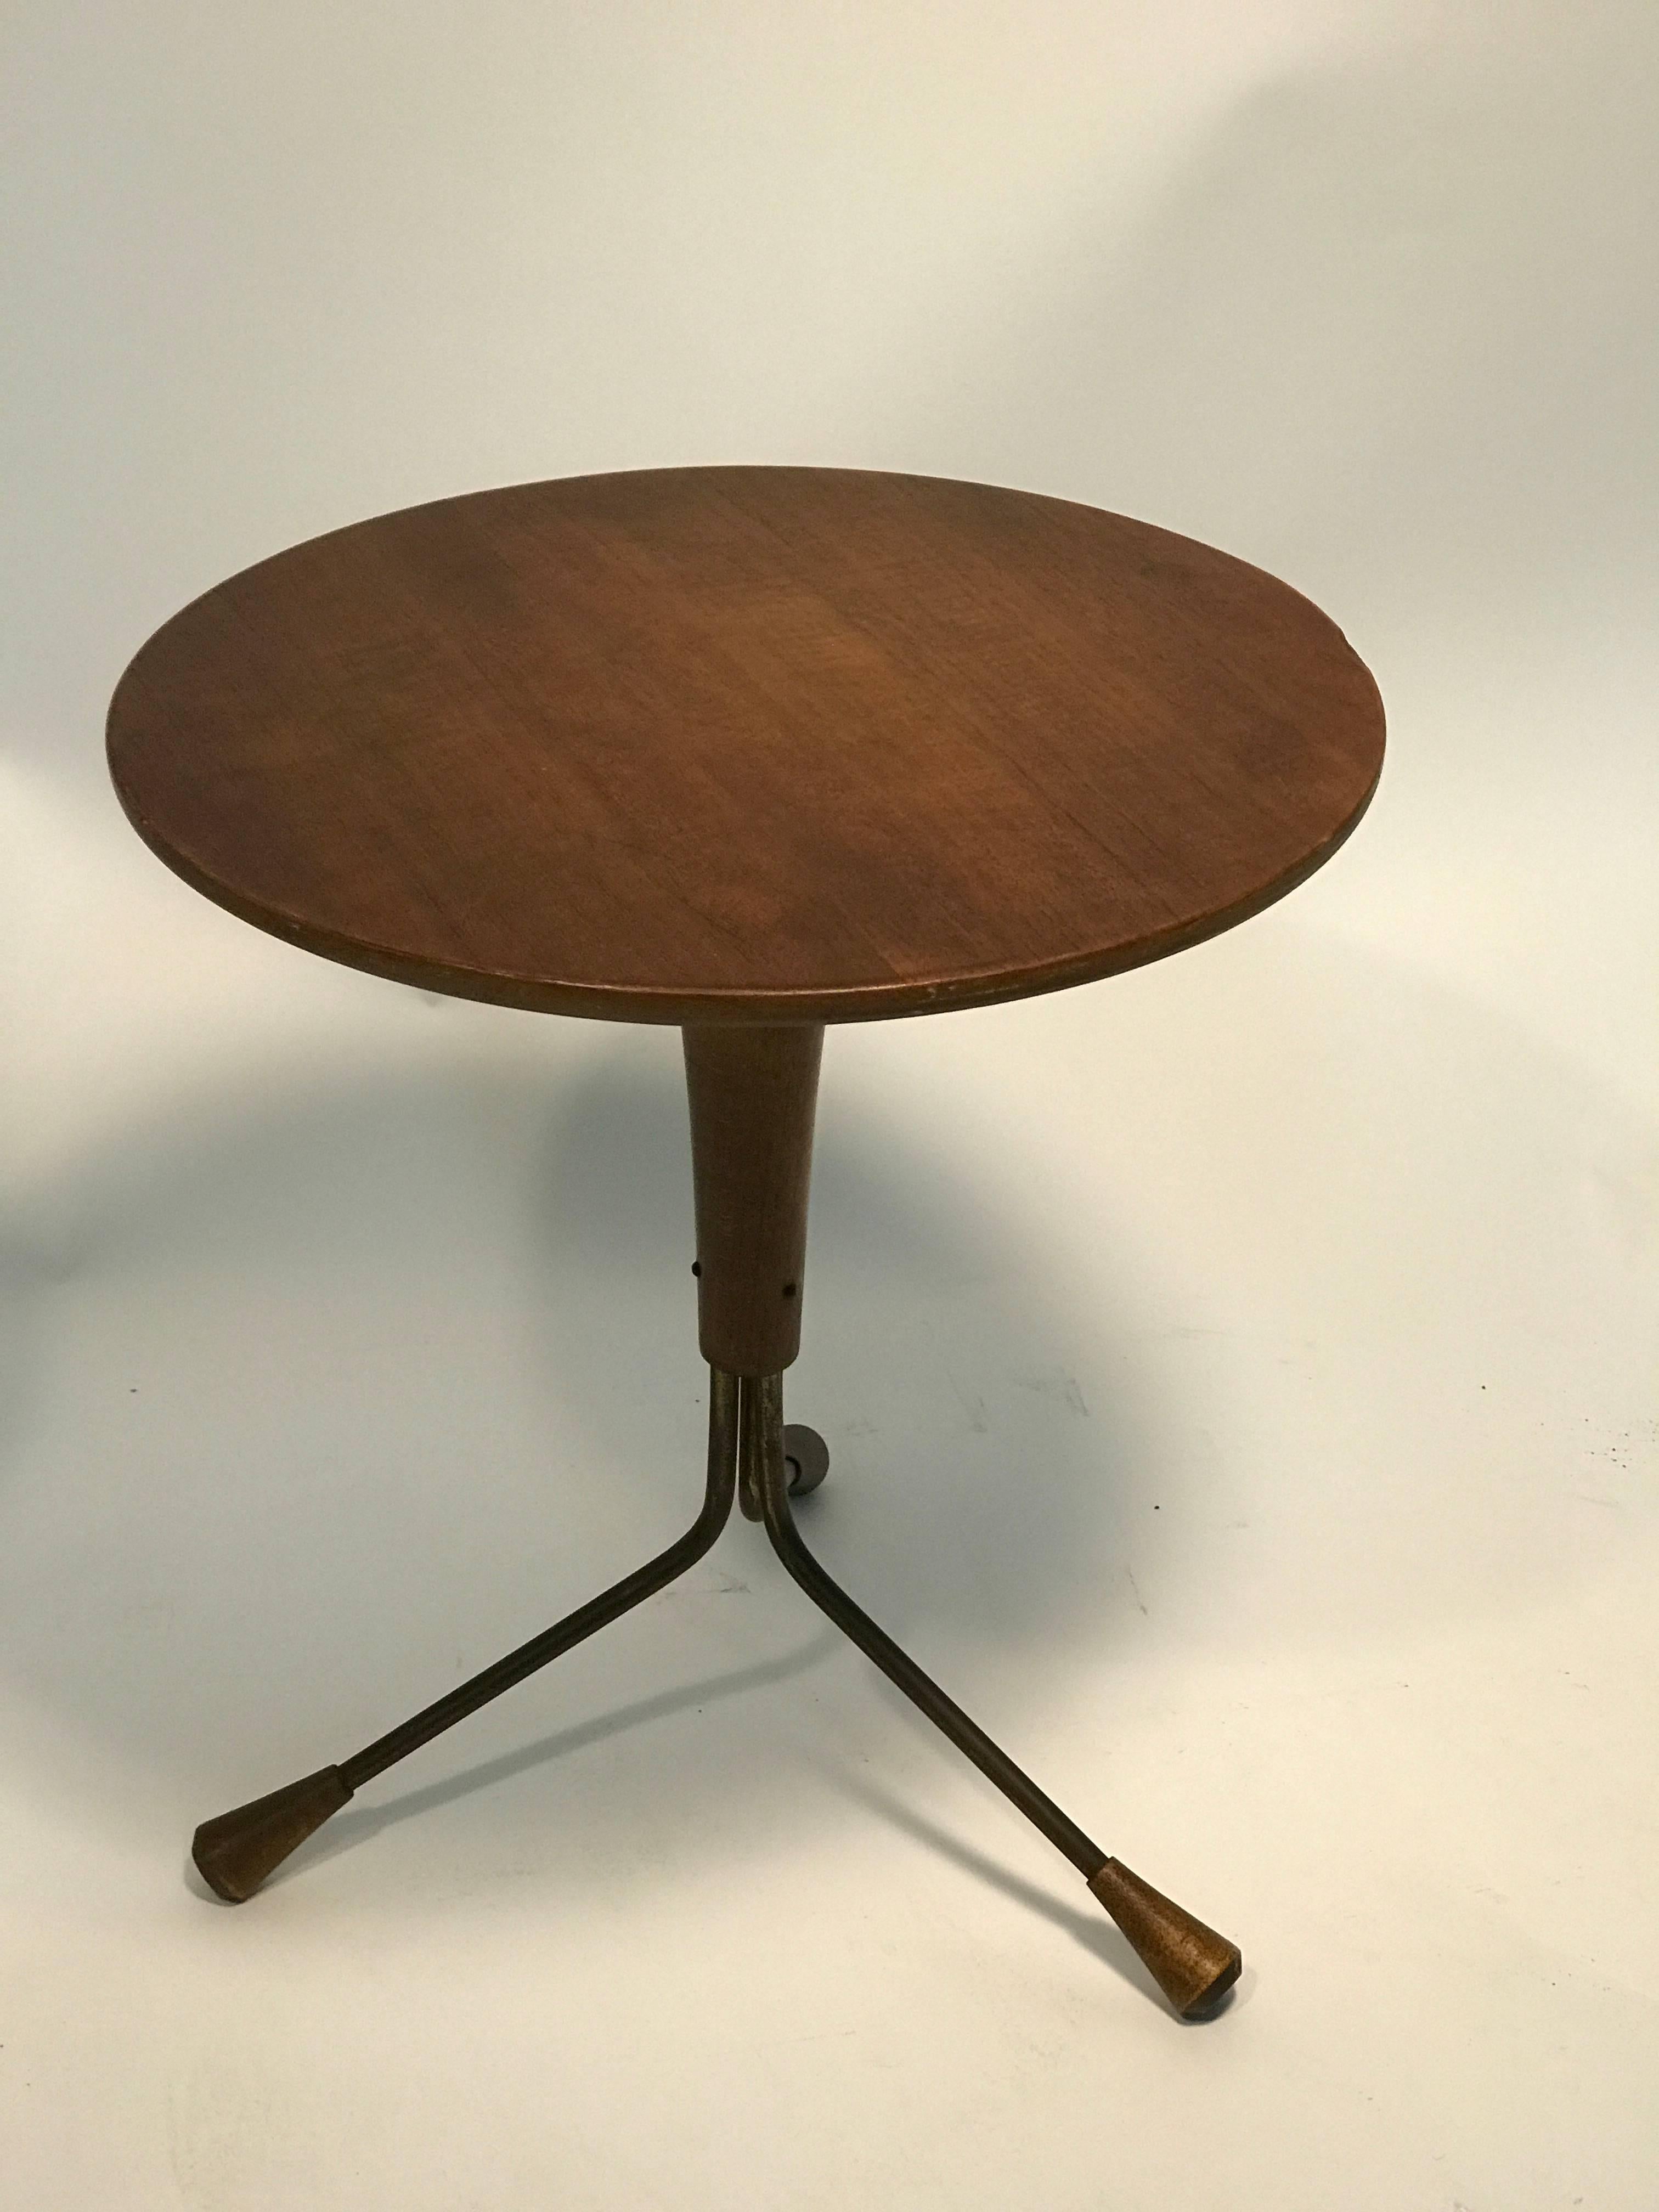 A great Danish modern pair of adjustable wood and iron side tables with tripod bases and fantastic flared legs in the style of Gio Ponti, circa 1970. One table is two inches higher than the other. Good vintage condition with age appropriate wear.